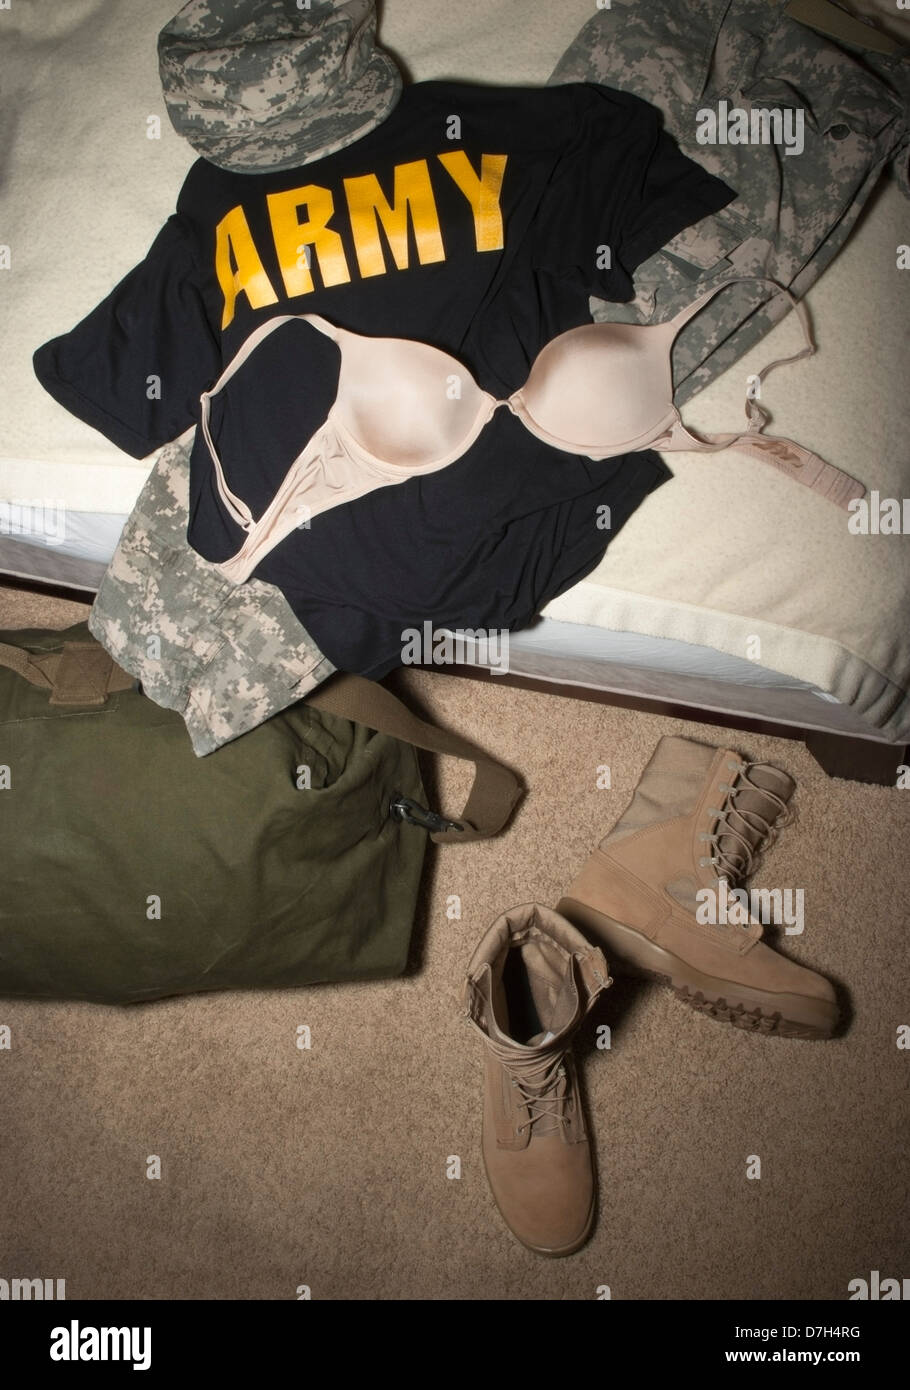 Women’s Army Combat (ACU) camouflage hat, pants, desert Combat boots, Duffel bag, tee-shirt and bra on a civilian bed. Stock Photo